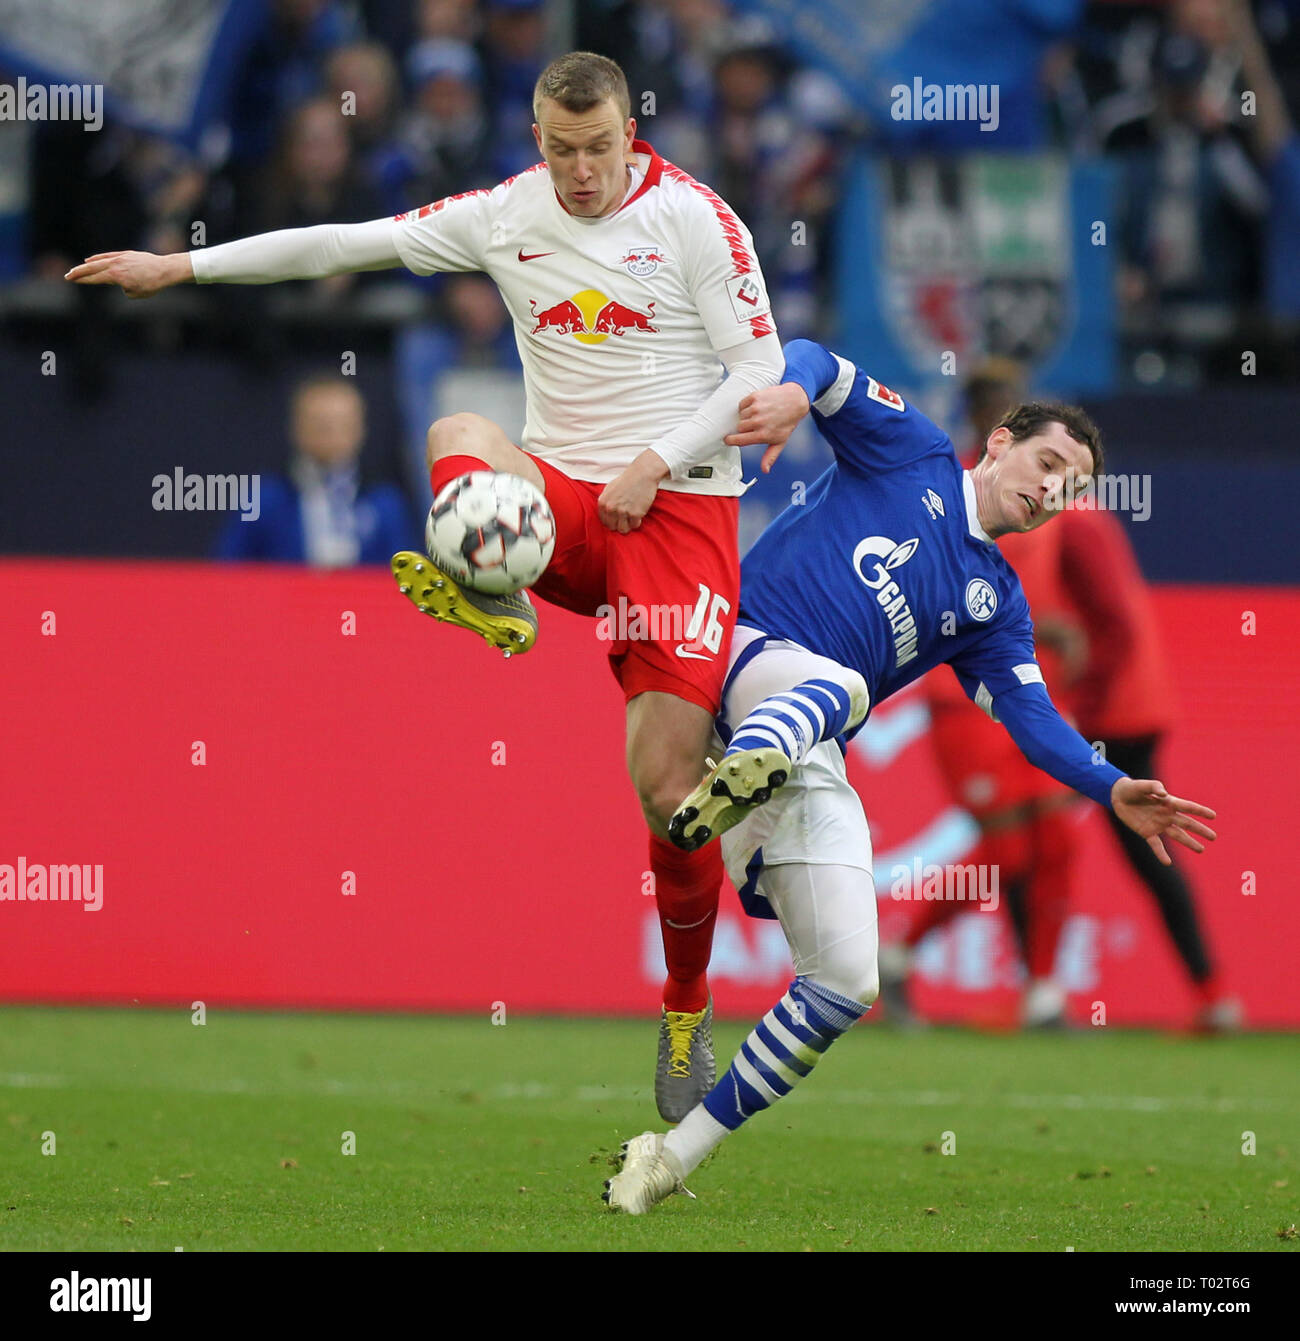 Gelsenkirchen, Germany. 16th March 2019. Sebastian Rudy of Schalke 04, right, and Lukas Klostermann of RB Leipzig are seen in action during the German Bundesliga soccer match between FC Schalke 04 and RB Leipzig in Gelsenkirchen. ( Final score; FC Schalke 0:1 RB Leipzig) Credit: SOPA Images Limited/Alamy Live News Stock Photo